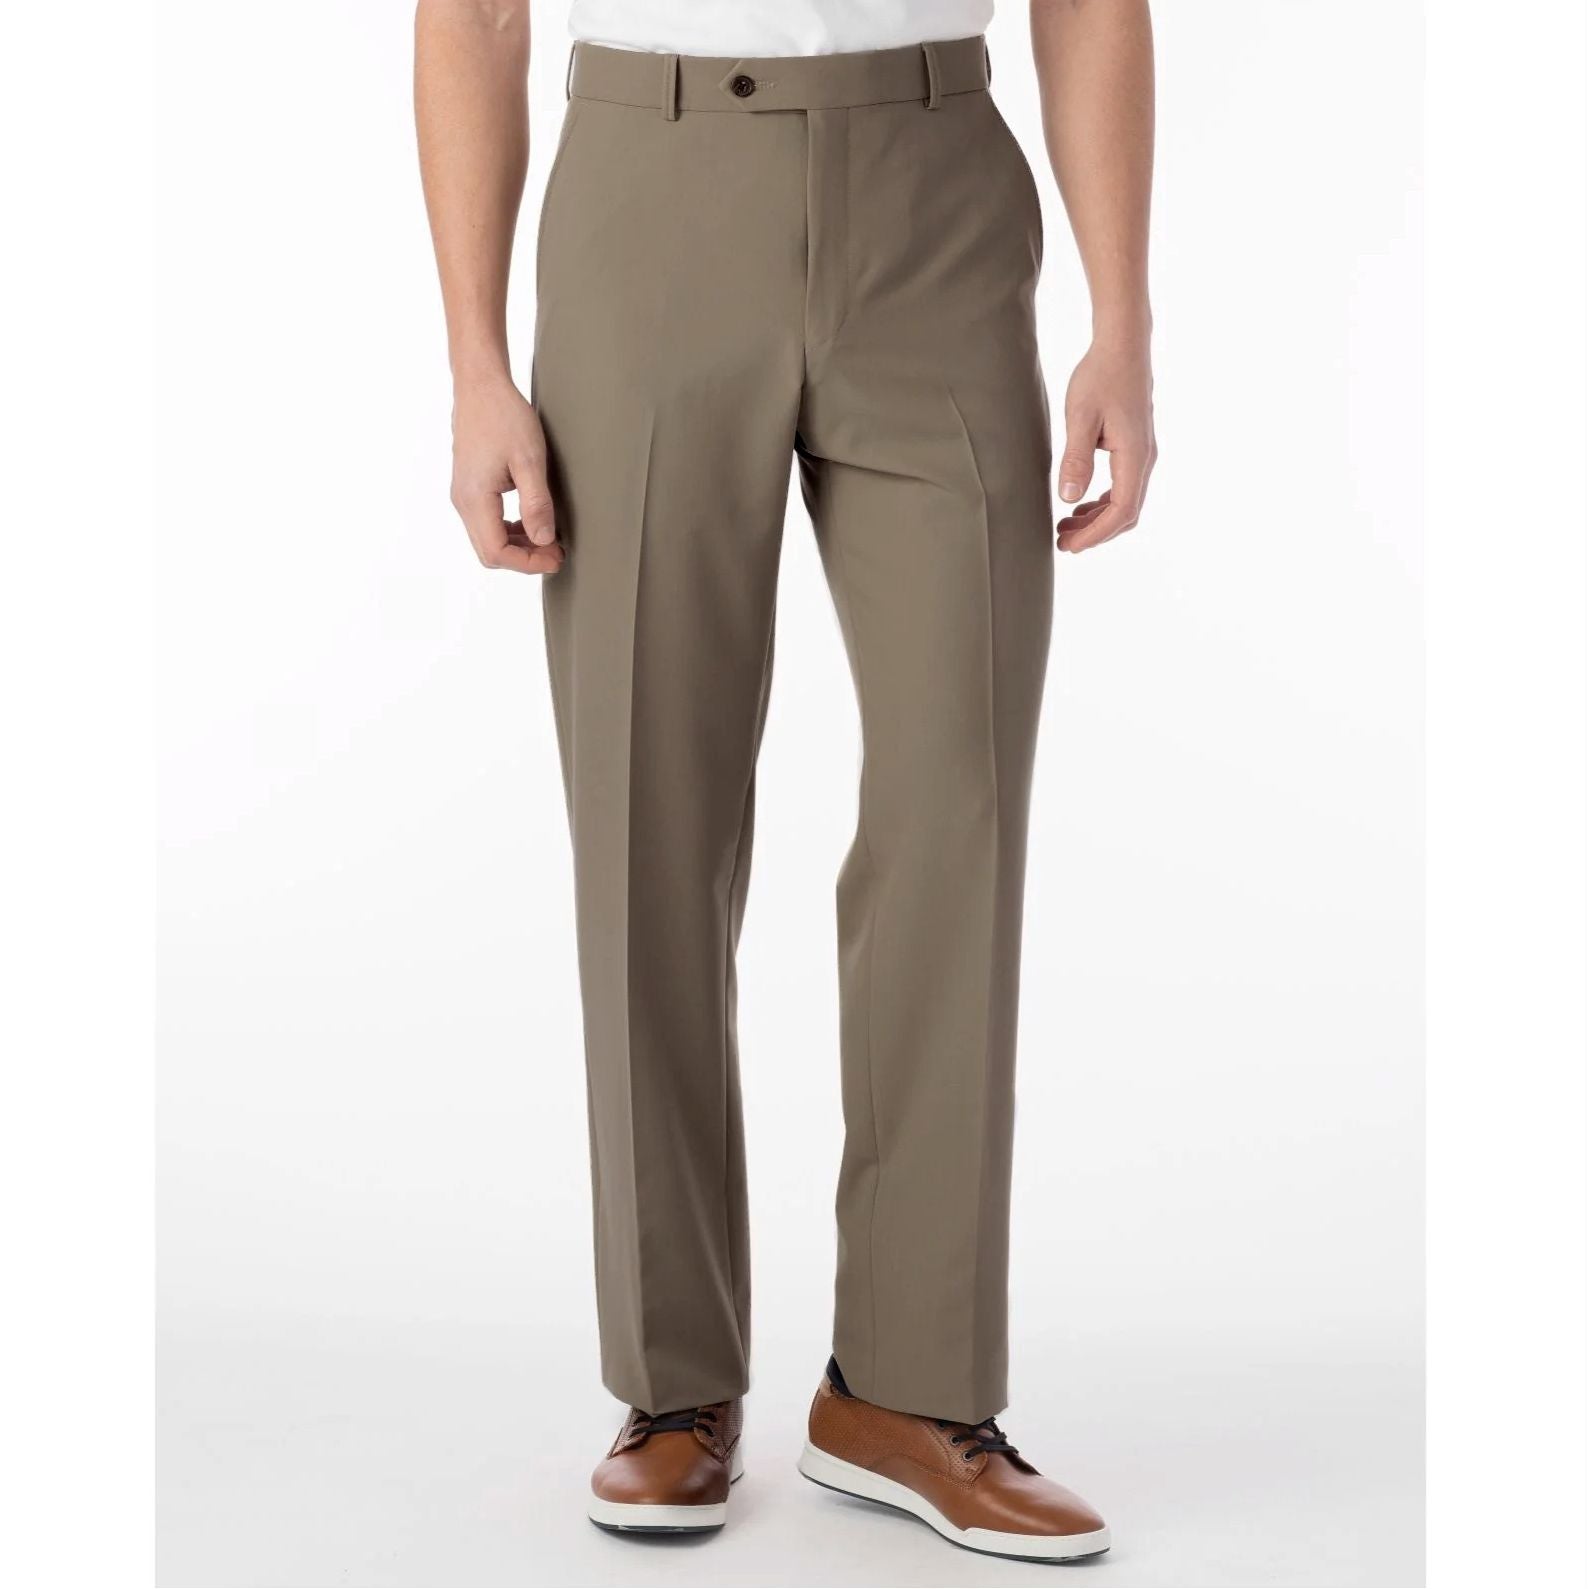 Performance Wool Blend Commuter Bi-Stretch Serge Comfort-EZE Trouser in Taupe Mix (Flat Front Models) by Ballin